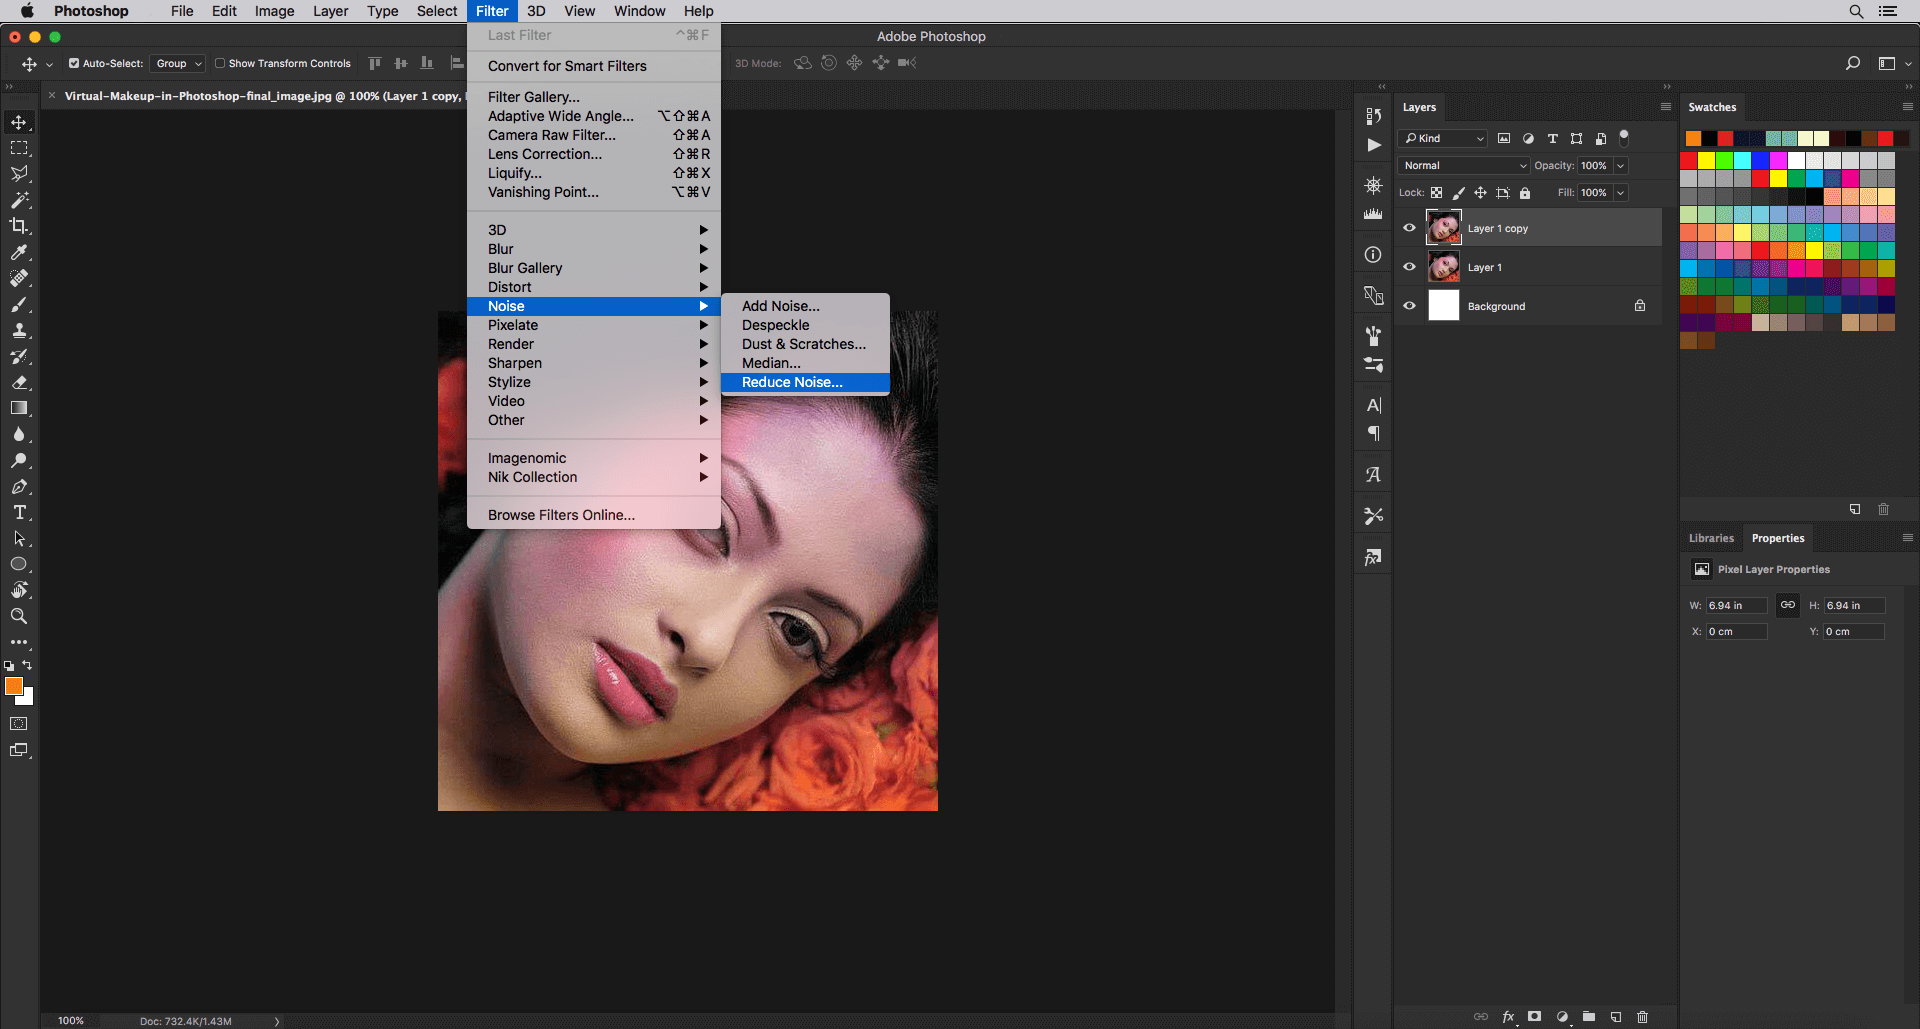 Step 2 Makeup in Photoshop